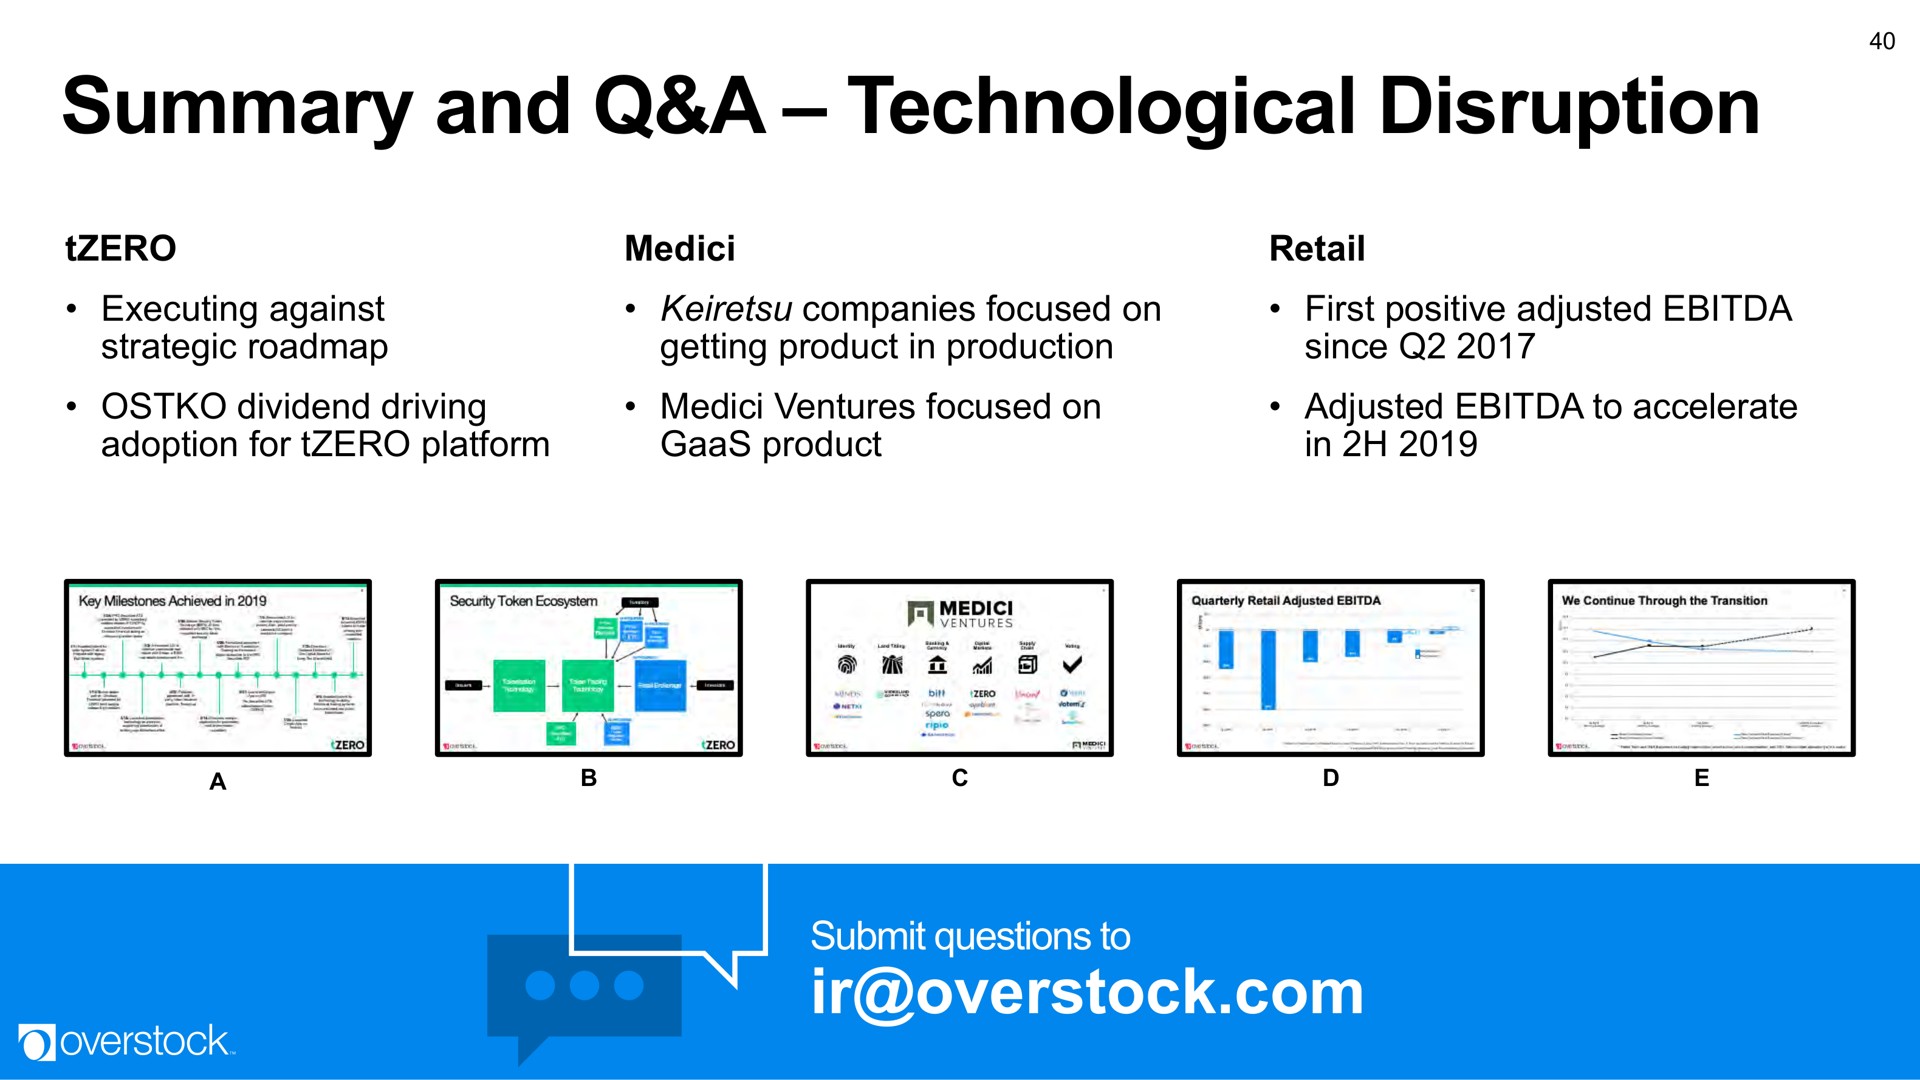 summary and a technological disruption | Overstock